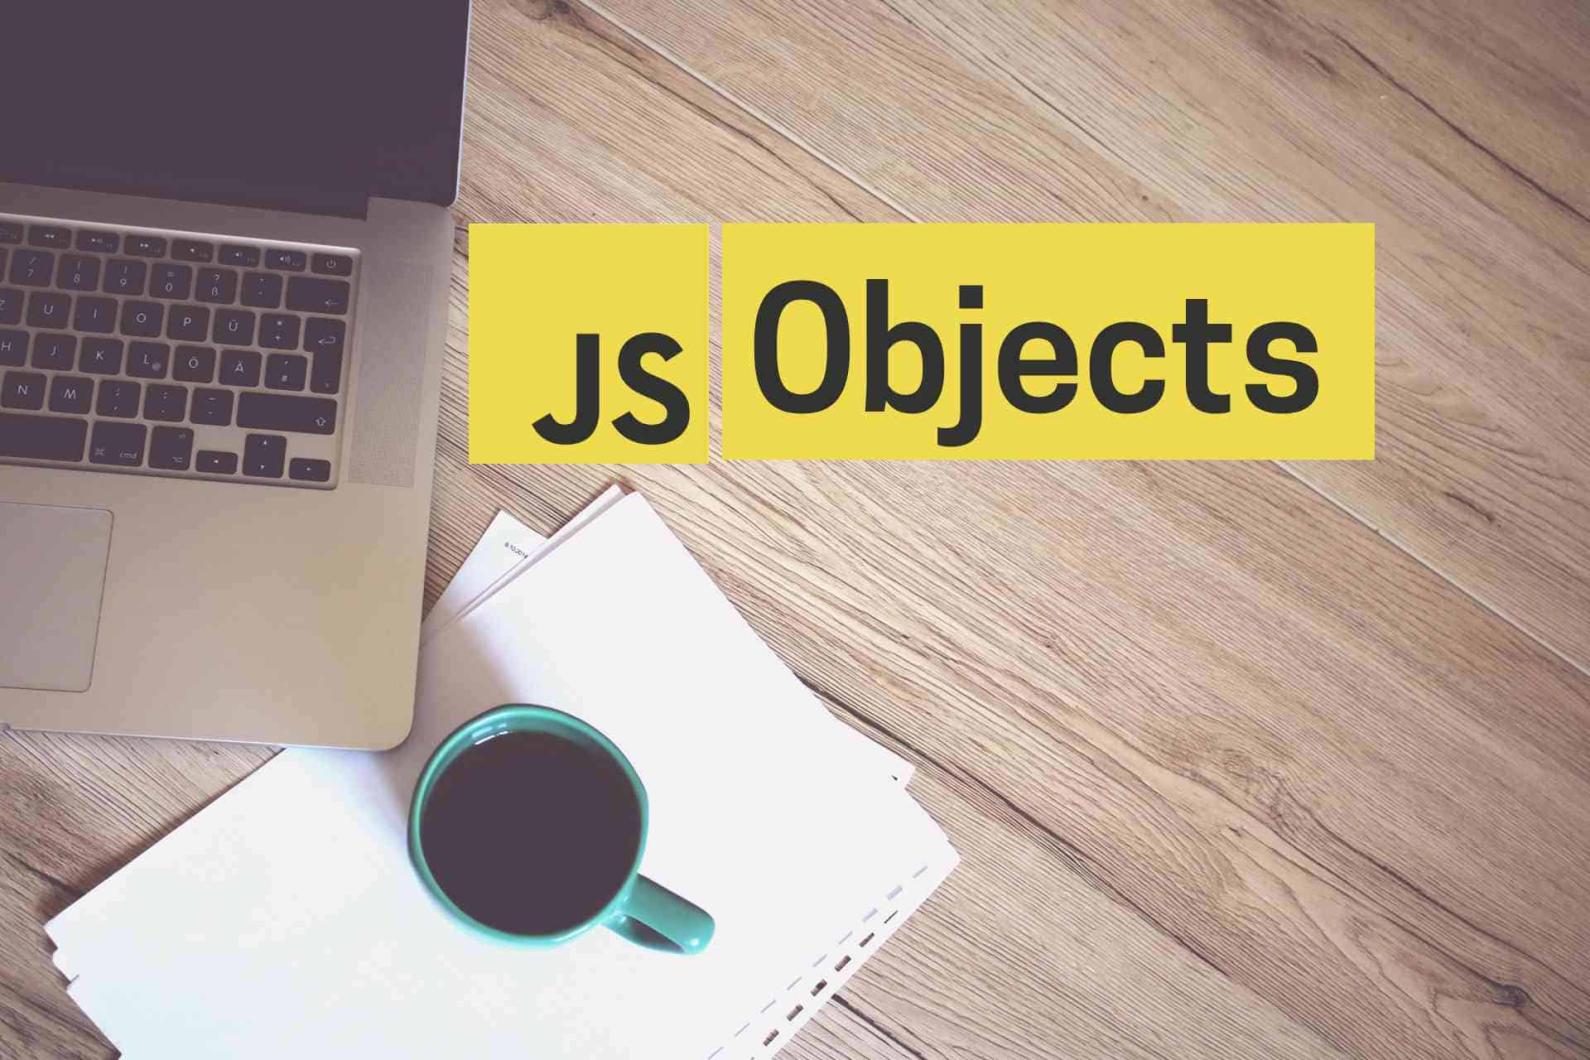 How Can JavaScript Objects Be Used to Store and Retrieve Data Efficiently?